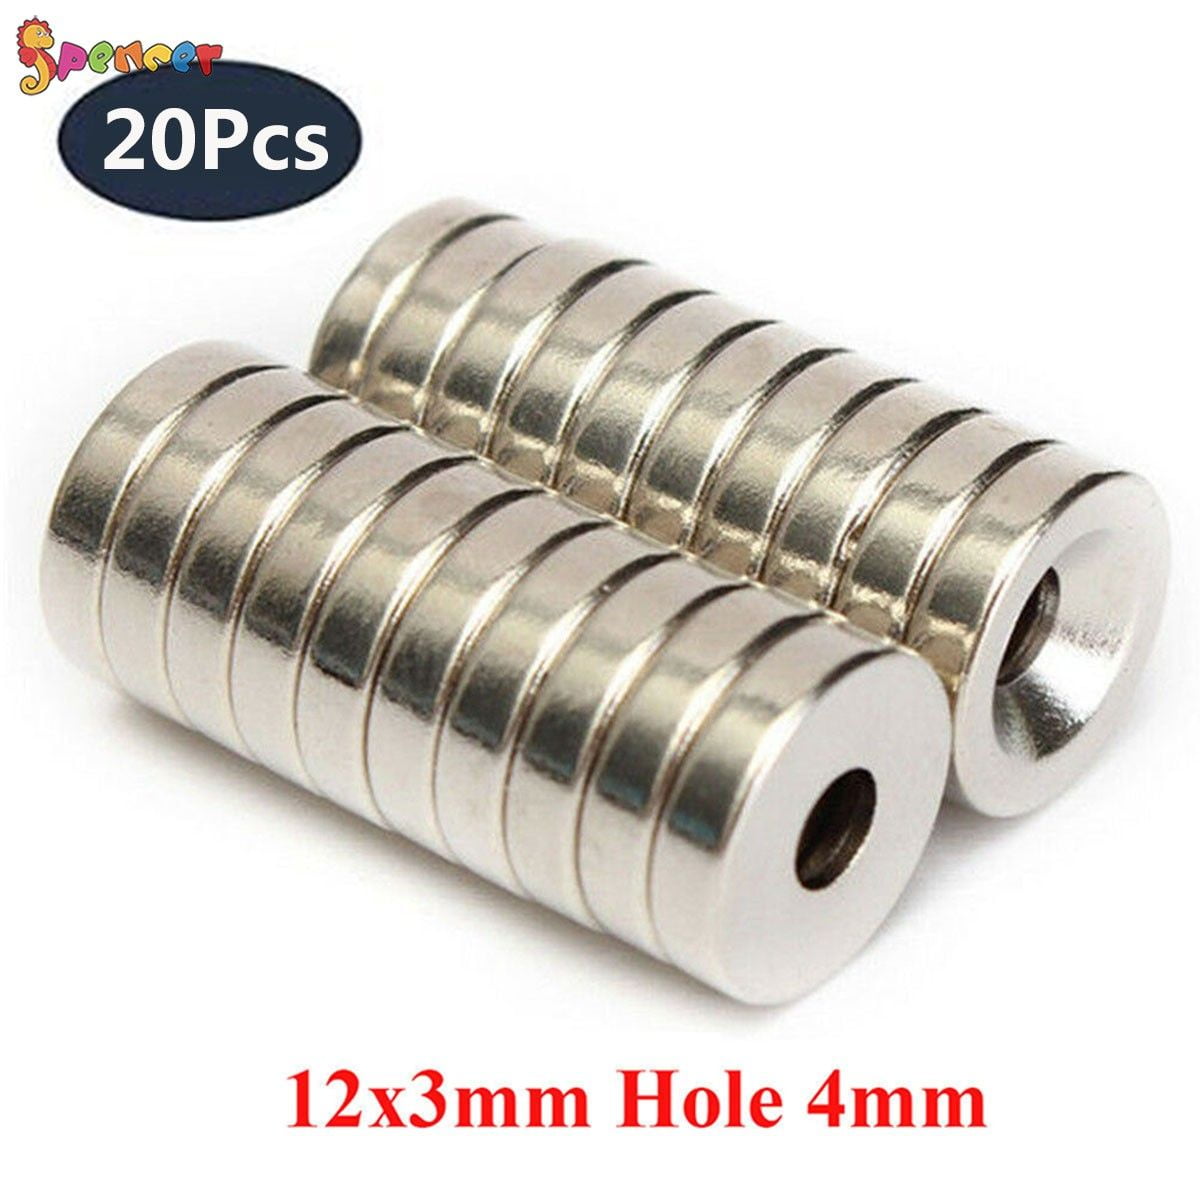 25pcs Strong Ring Magnet D 10*3mm Countersunk Hole:3mm Rare Earth Neodymium N50 